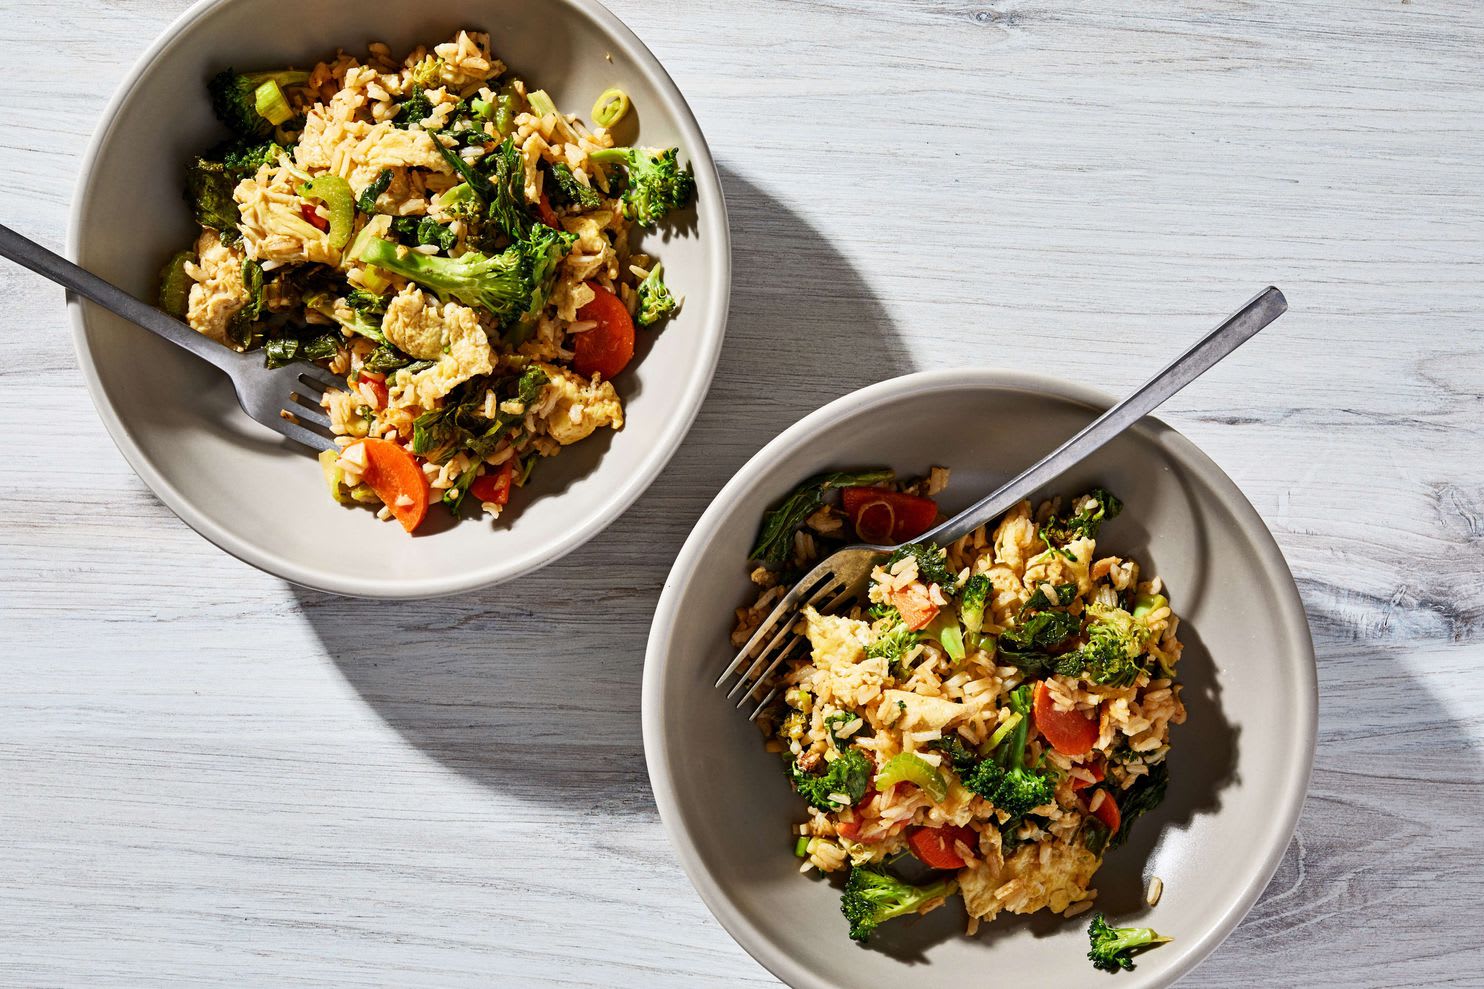 Leftover rice? You’ve got a head start on these 8 fried rice dishes